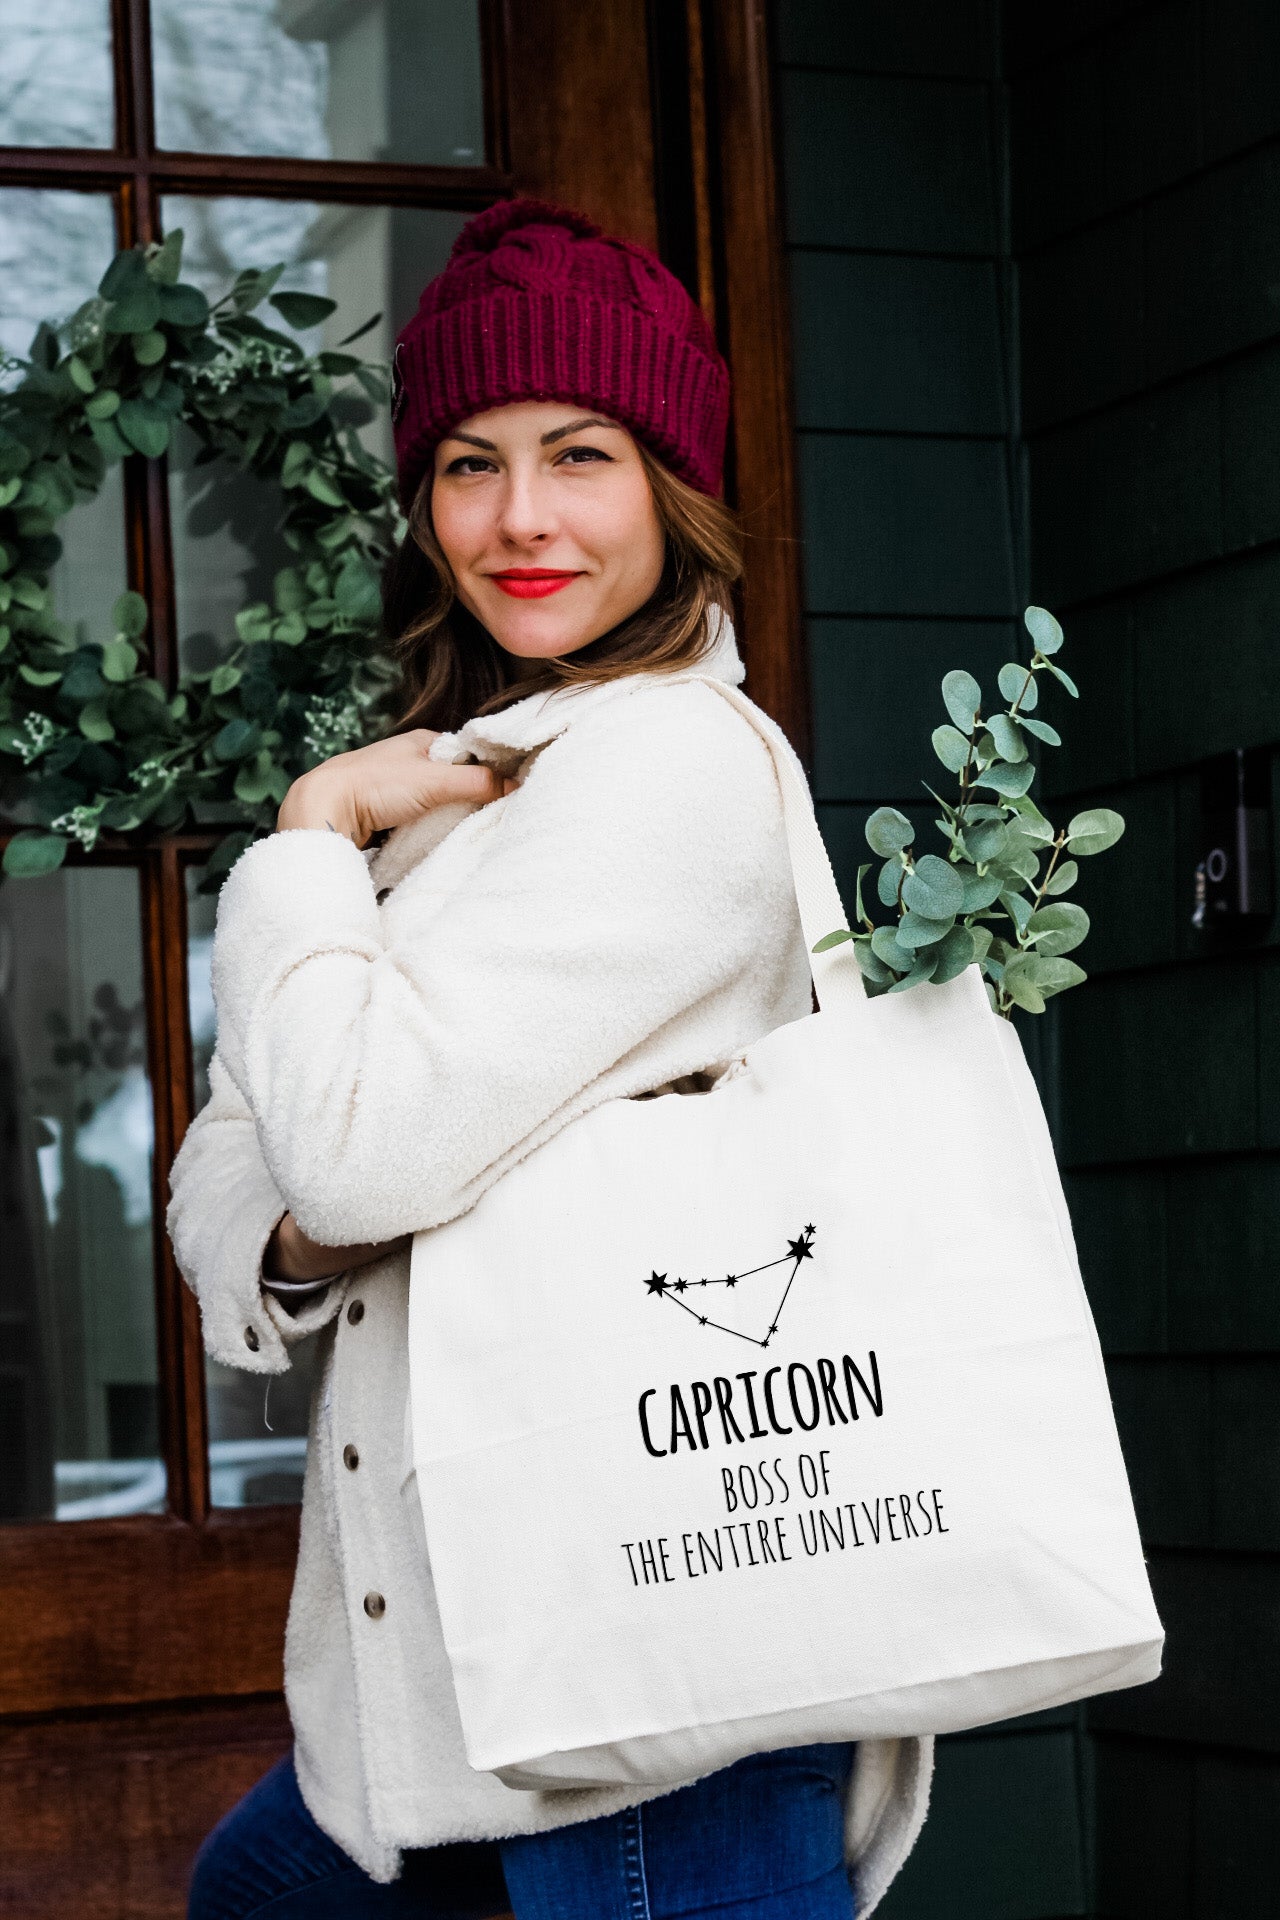 Capricorn Zodiac (Boss of the Entire Universe) - Tote Bag - MoonlightMakers